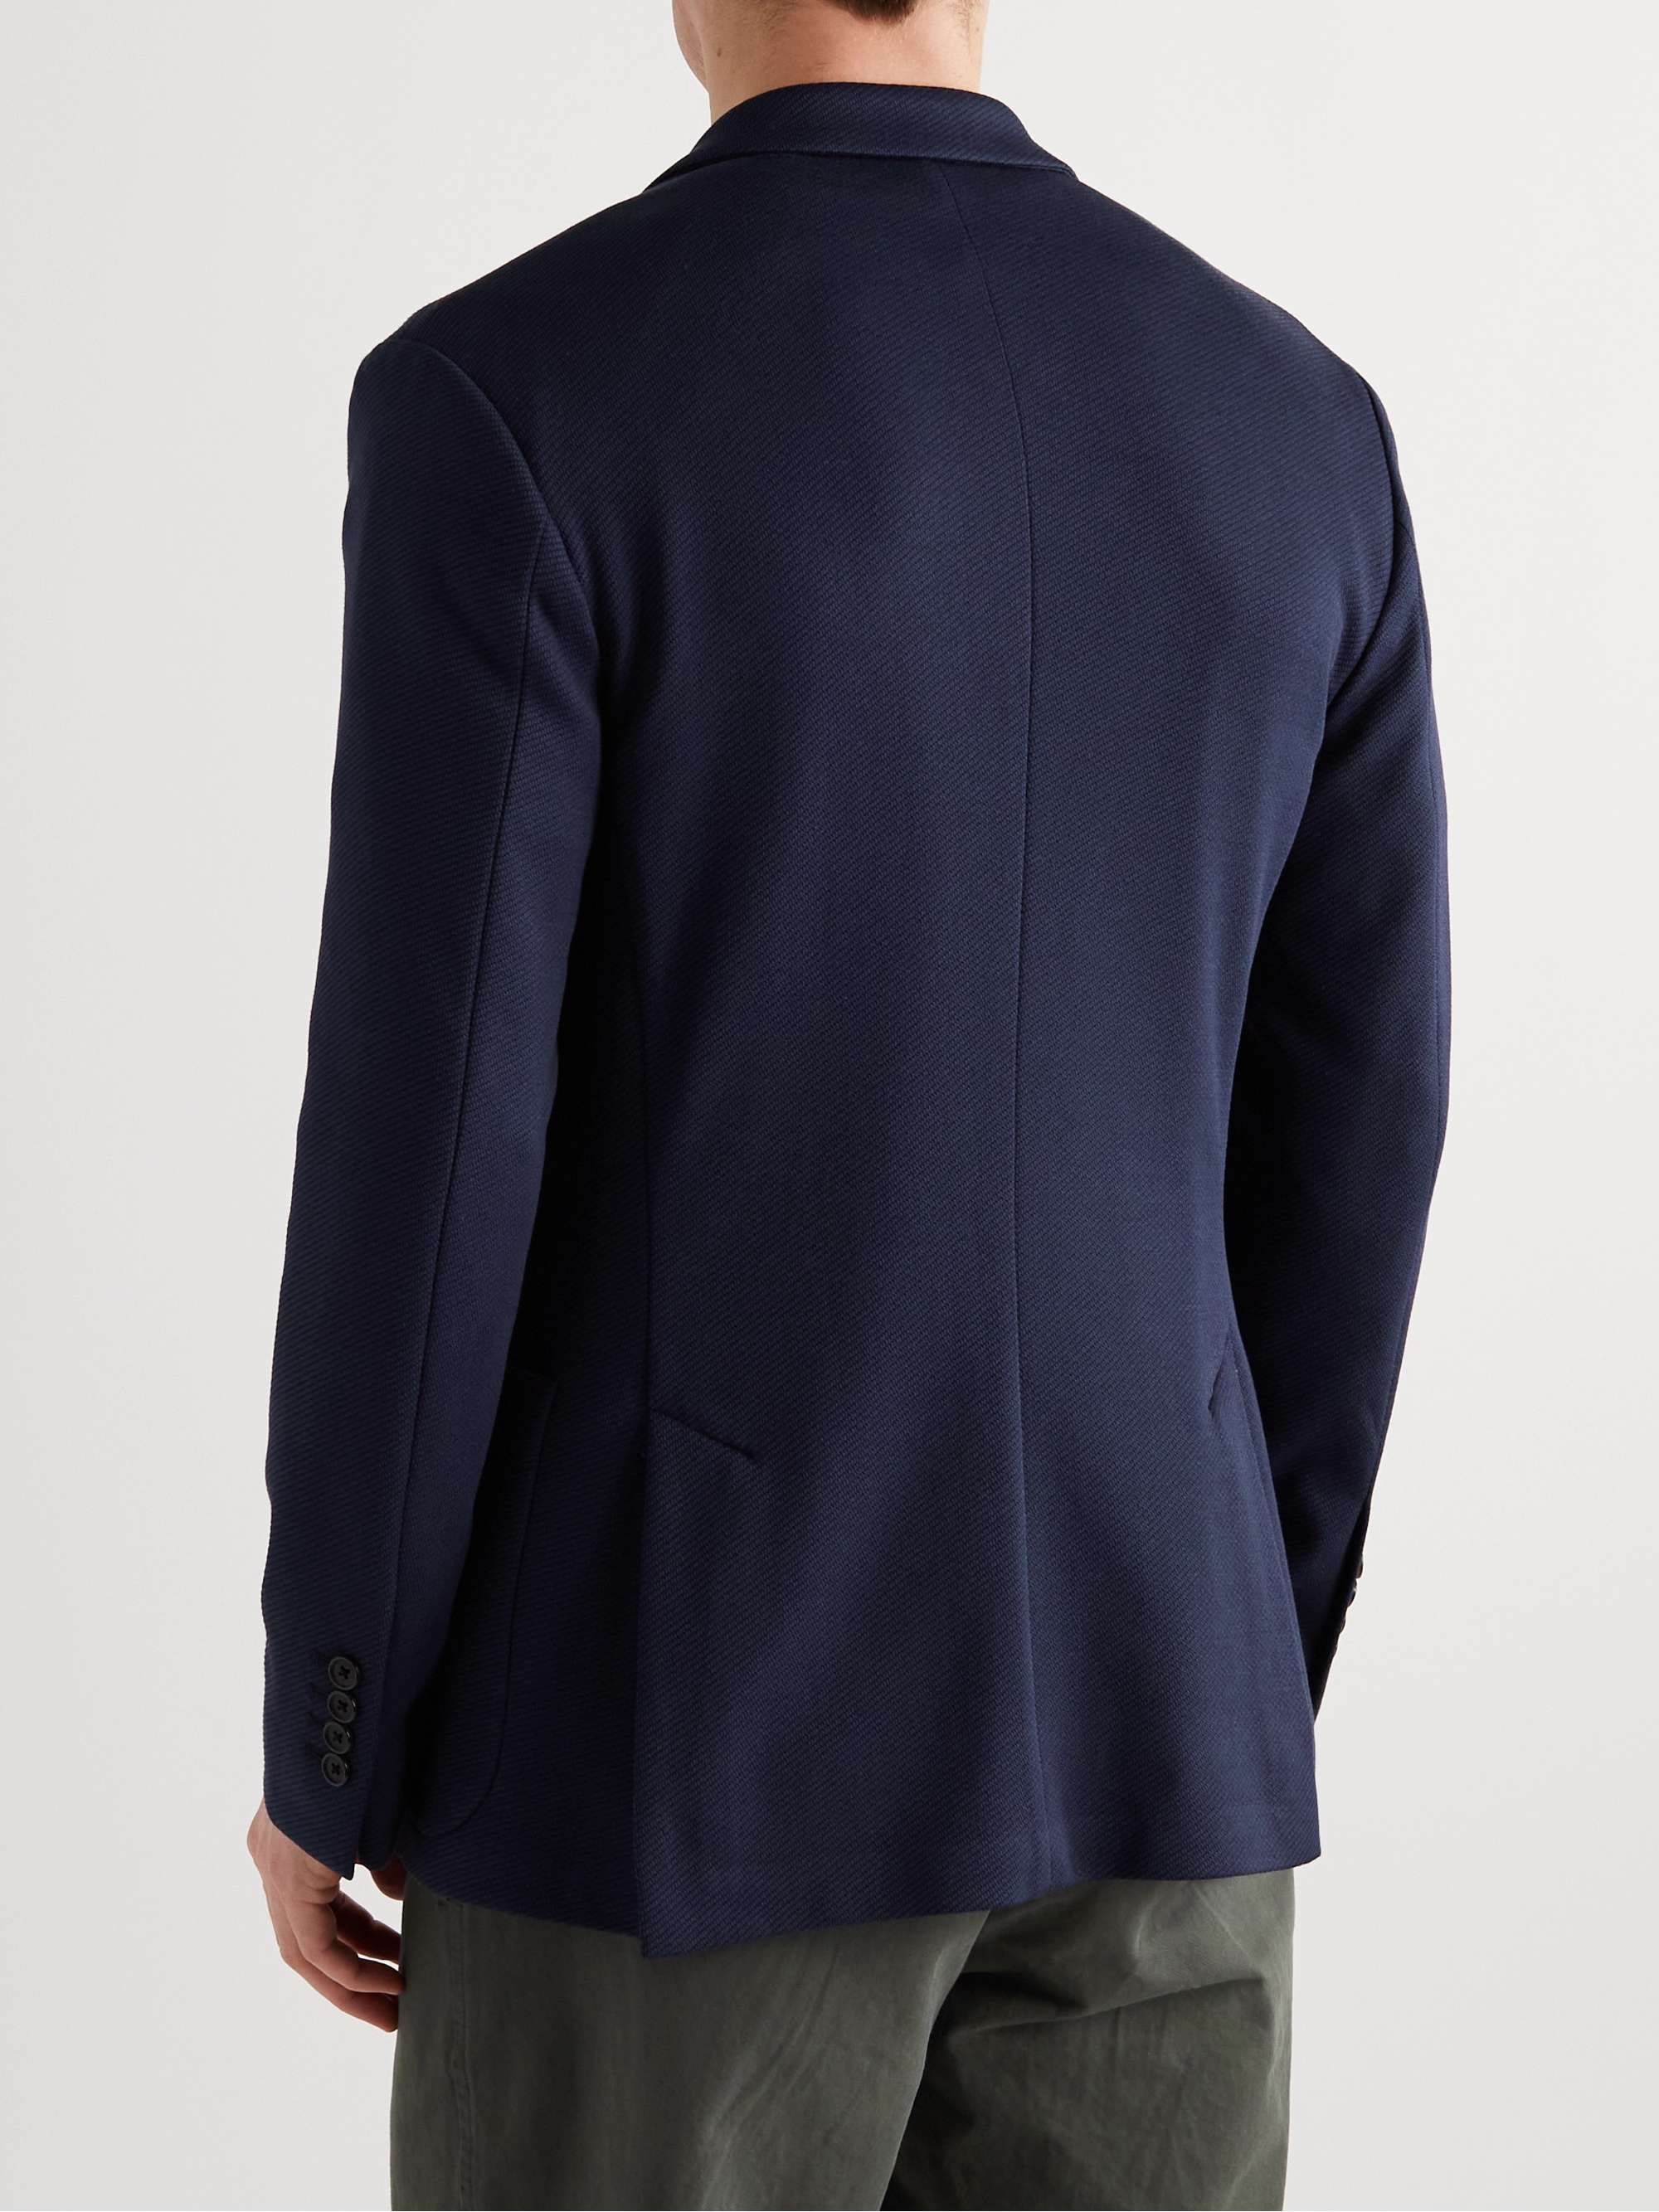 PAUL SMITH Unstructured Jersey Suit Jacket